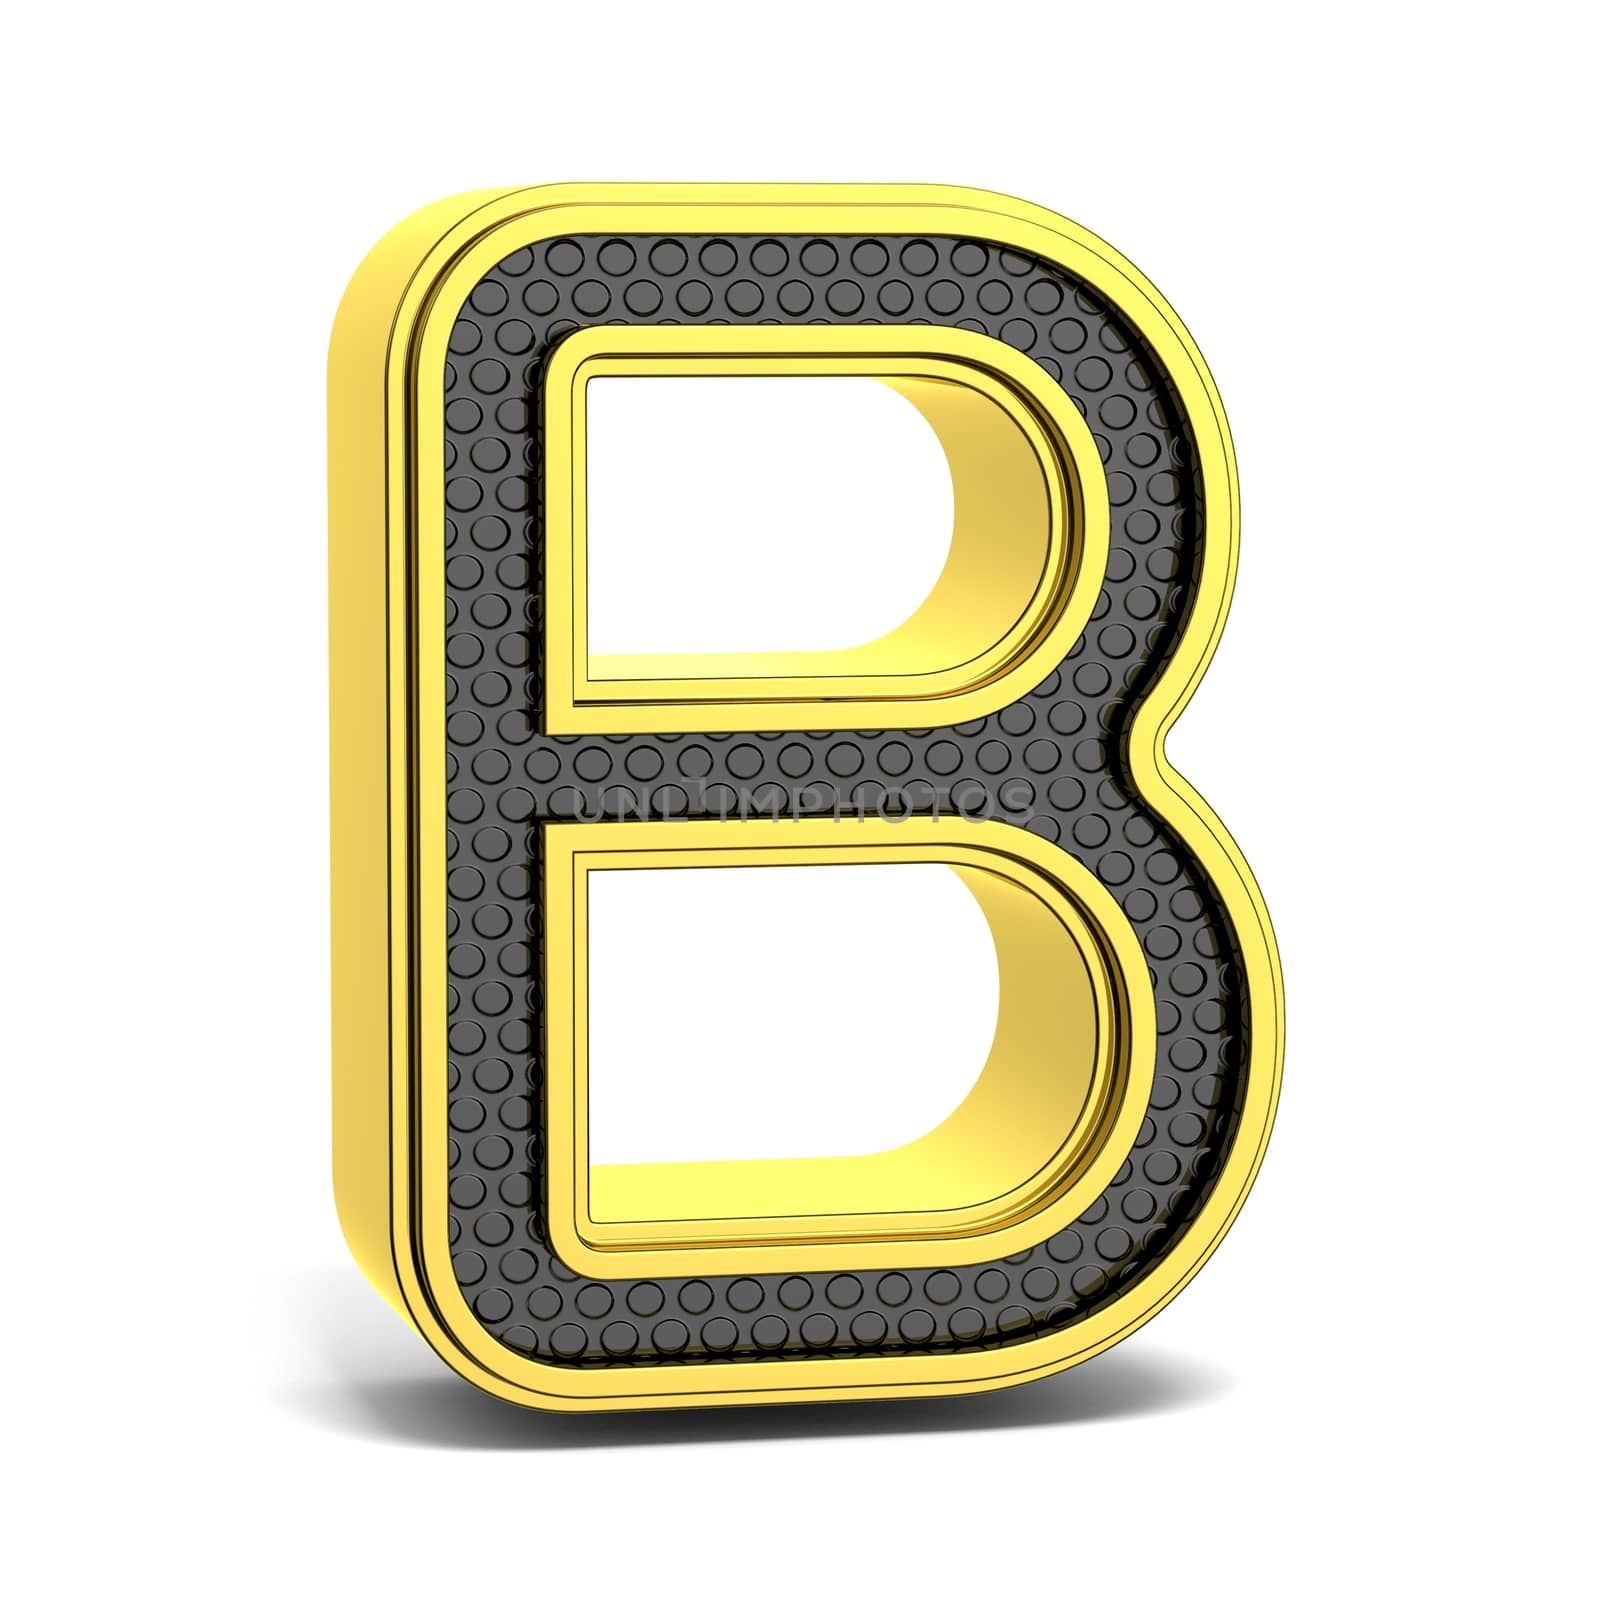 Golden and black round alphabet. Letter B. 3D render illustration isolated on white background with soft shadow